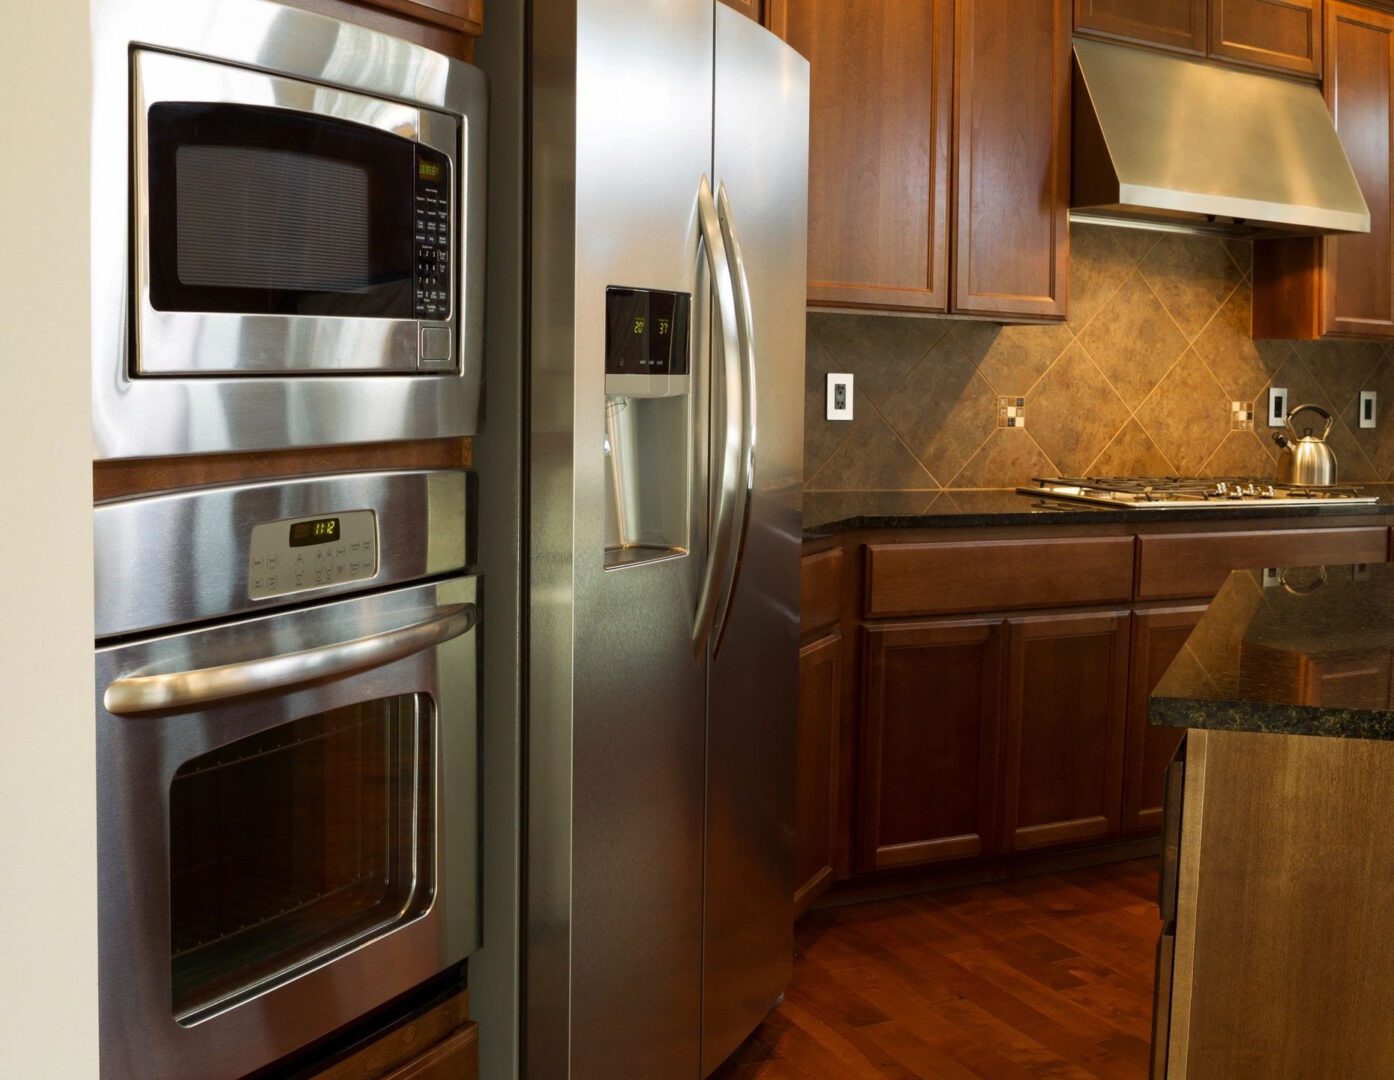 A kitchen with stainless steel appliances and wooden cabinets.